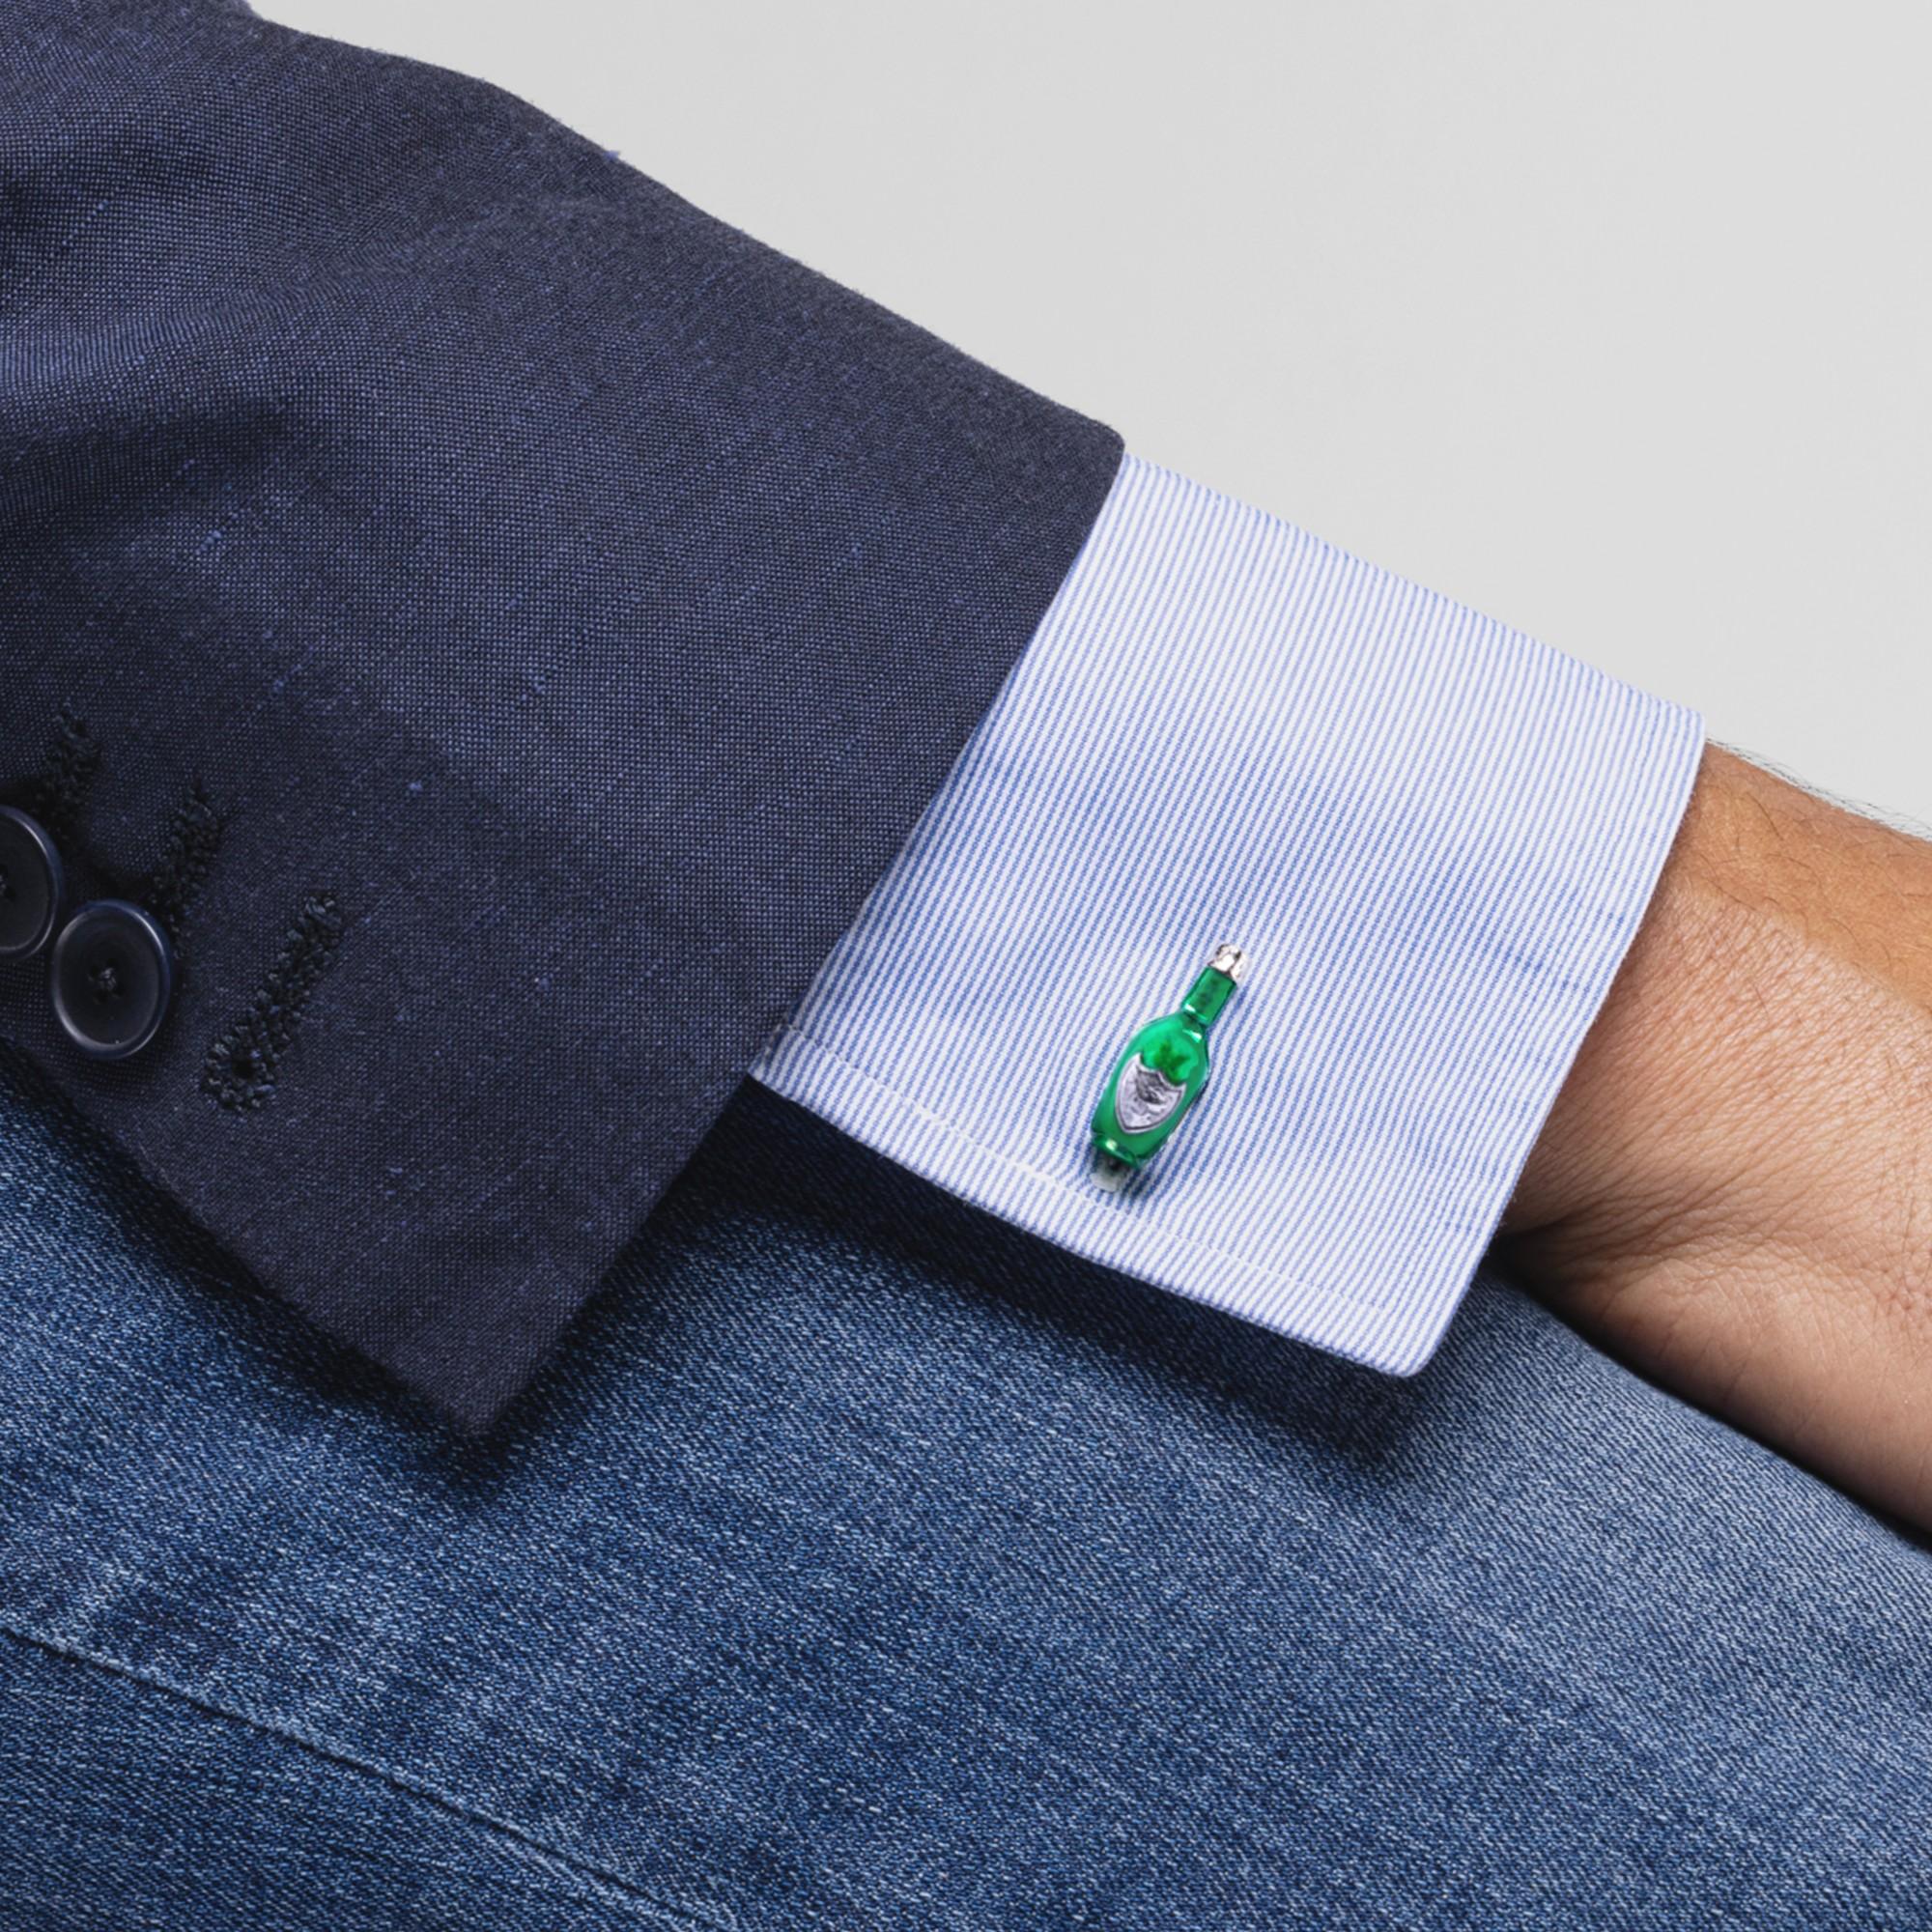 Celebrate with Alex Jona champagne bottle & cork cufflinks!
These sophisticated green champagne bottle cufflinks are perfect for special occasions. They have been designed by Alex Jona, hand crafted in Italy in sterling silver with green enamel for